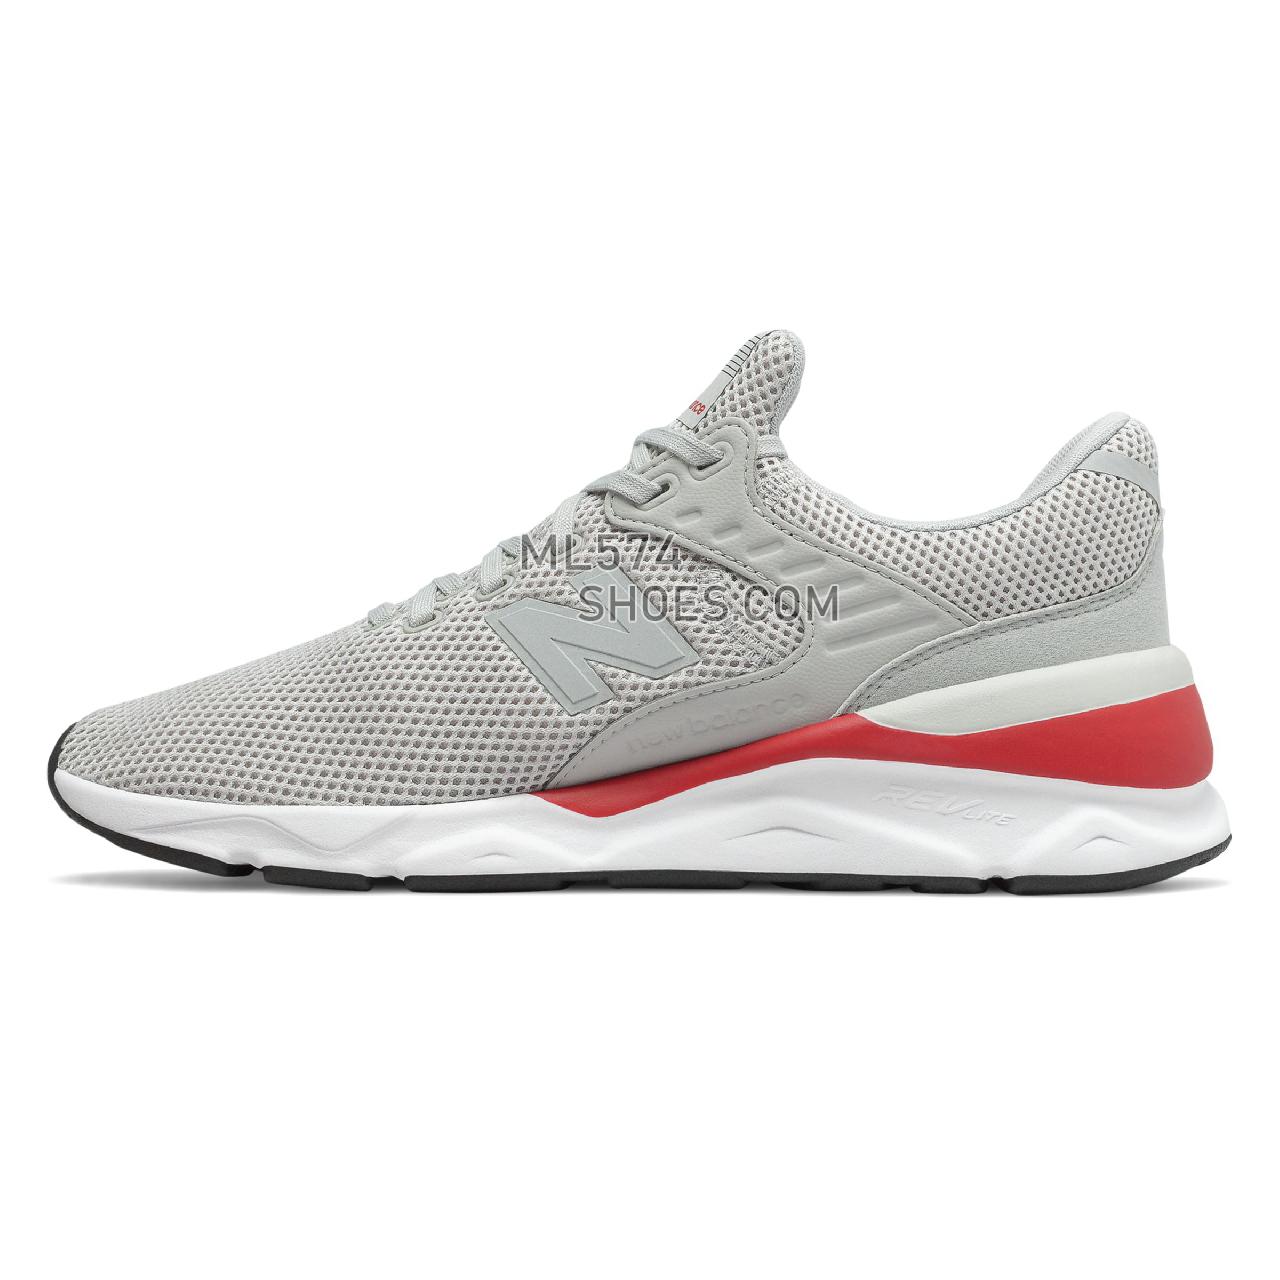 New Balance X-90 - Men's Sport Style Sneakers - Rain Cloud with Team Red - MSX90TXD